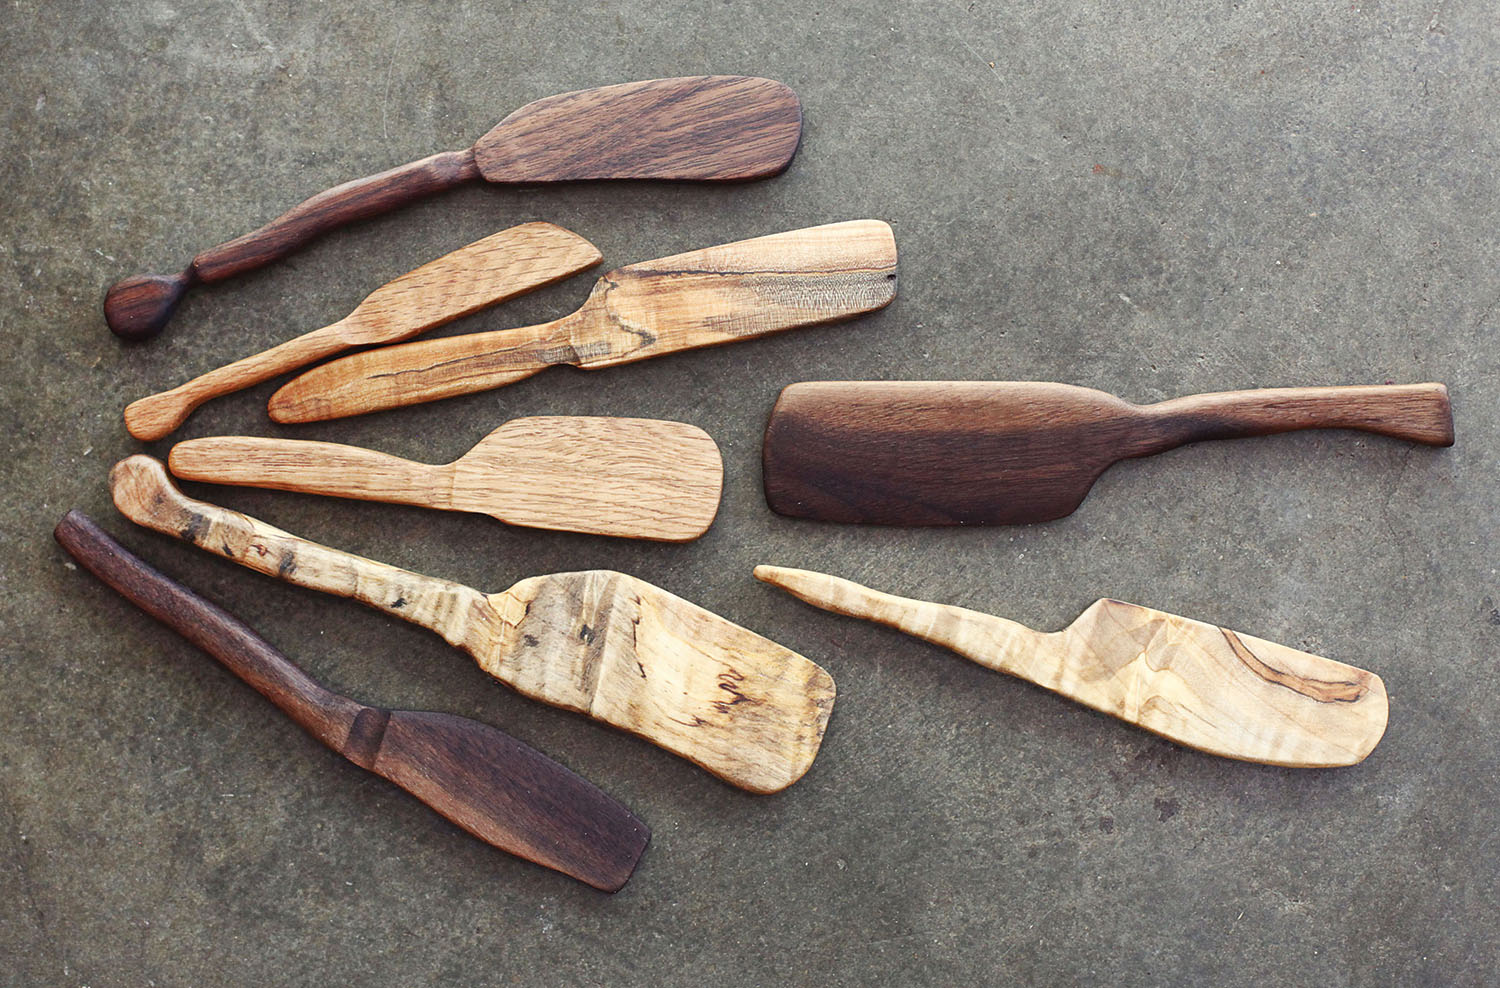 Koli Fisher’s handcrafted boards and cutlery are safe from imitation. Photo by Jen CK Jacobs